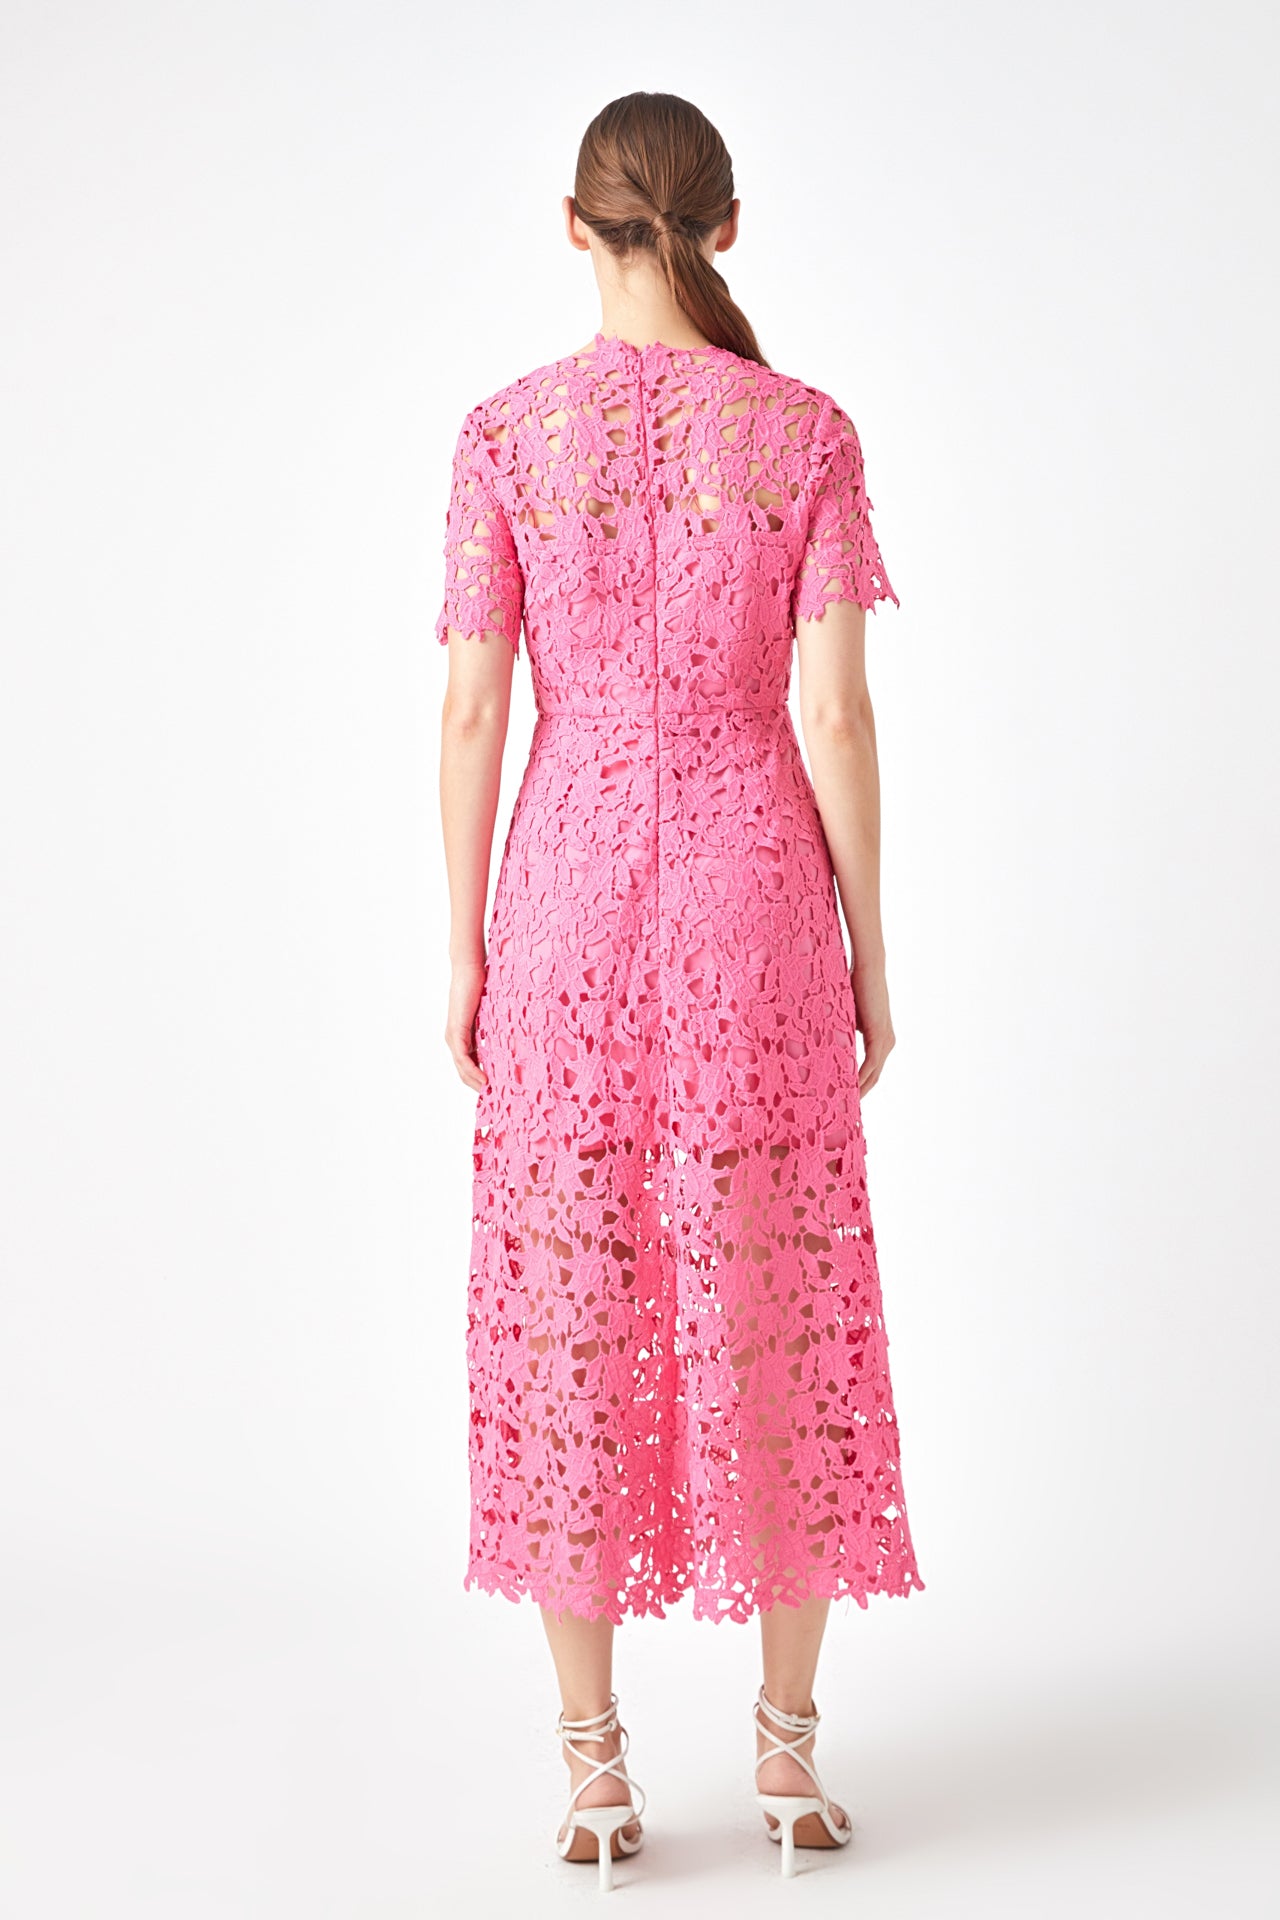 ENDLESS ROSE - All Over Lace Short Sleeves Midi Dress - DRESSES available at Objectrare